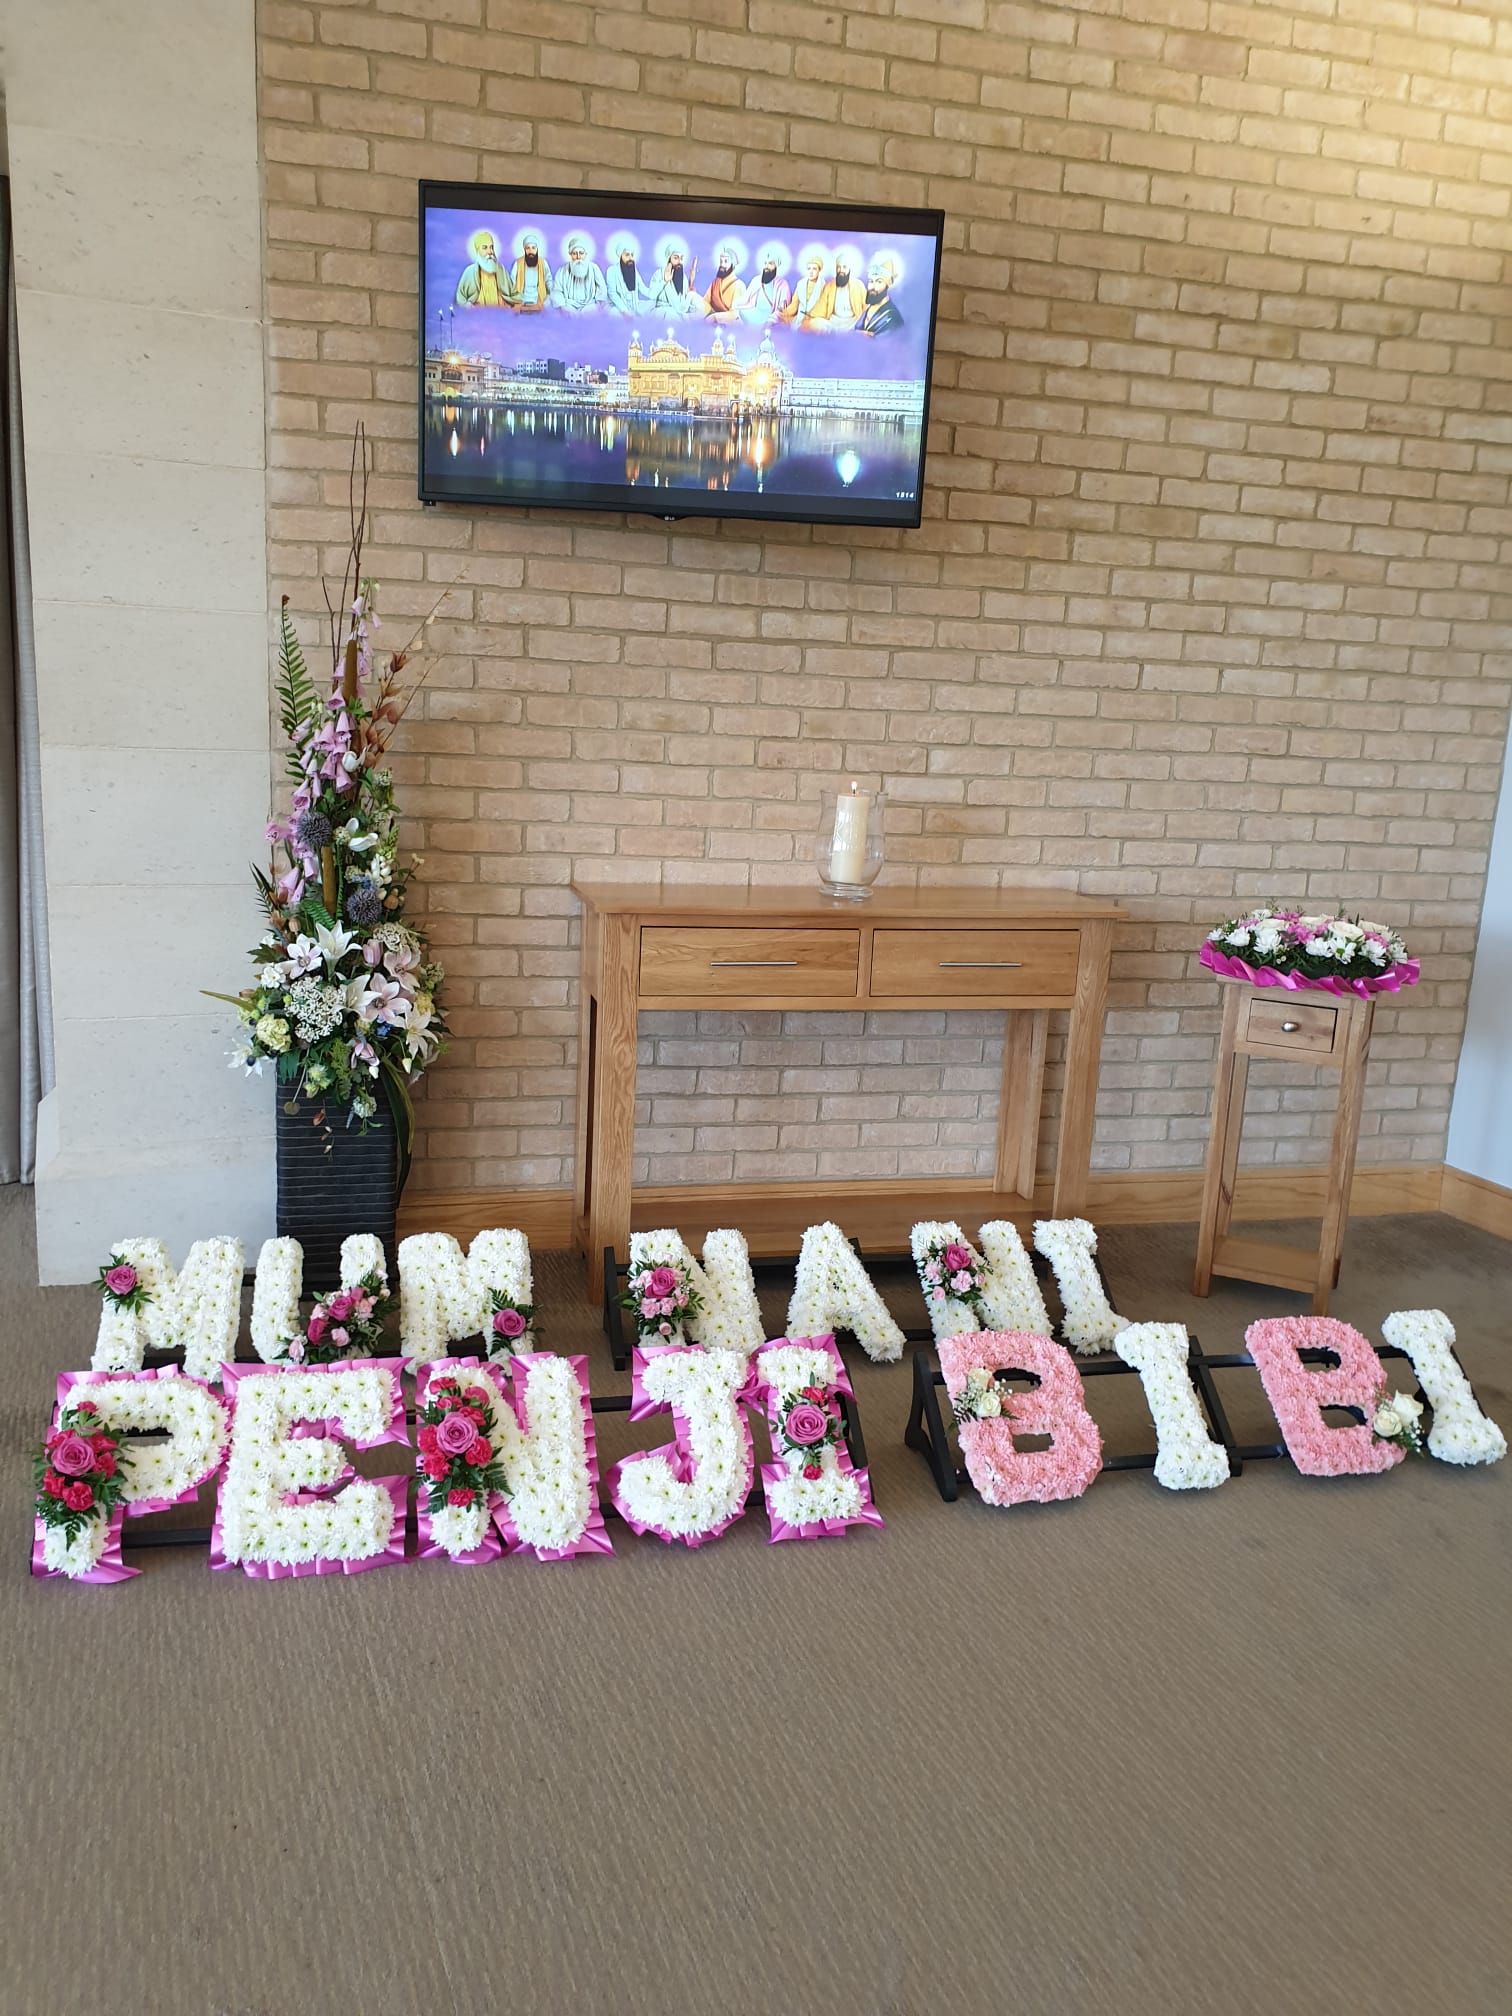 SPECIAL FUNERAL FLOWERS